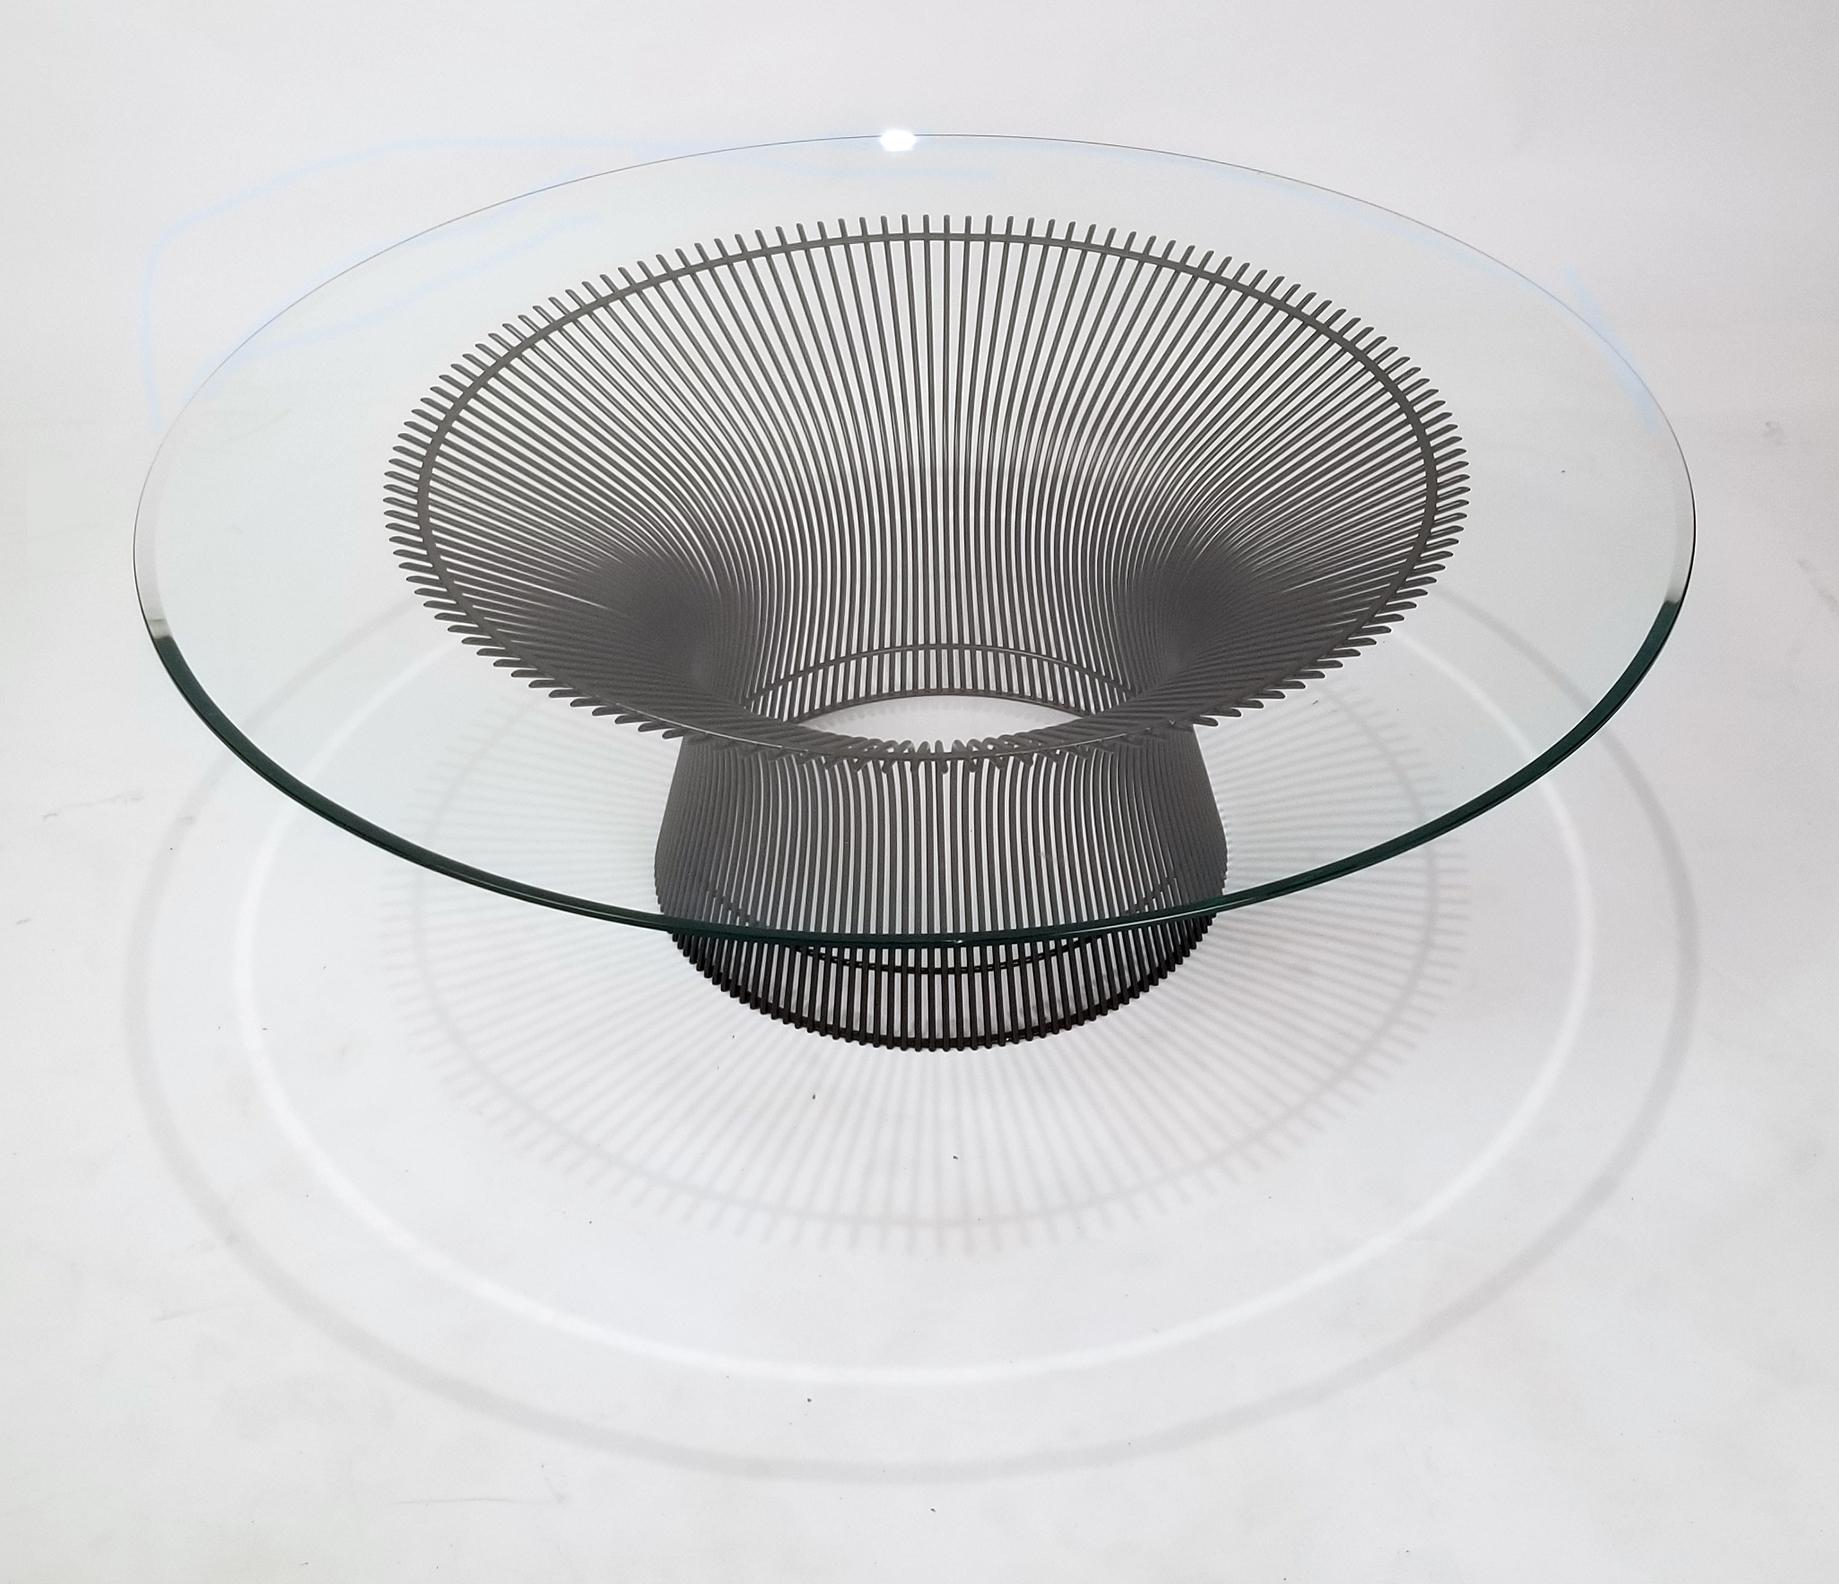 Coffee table designed by Warren Platner for Knoll, 1966. Table is bronze wire construction with the original beveled glass top.